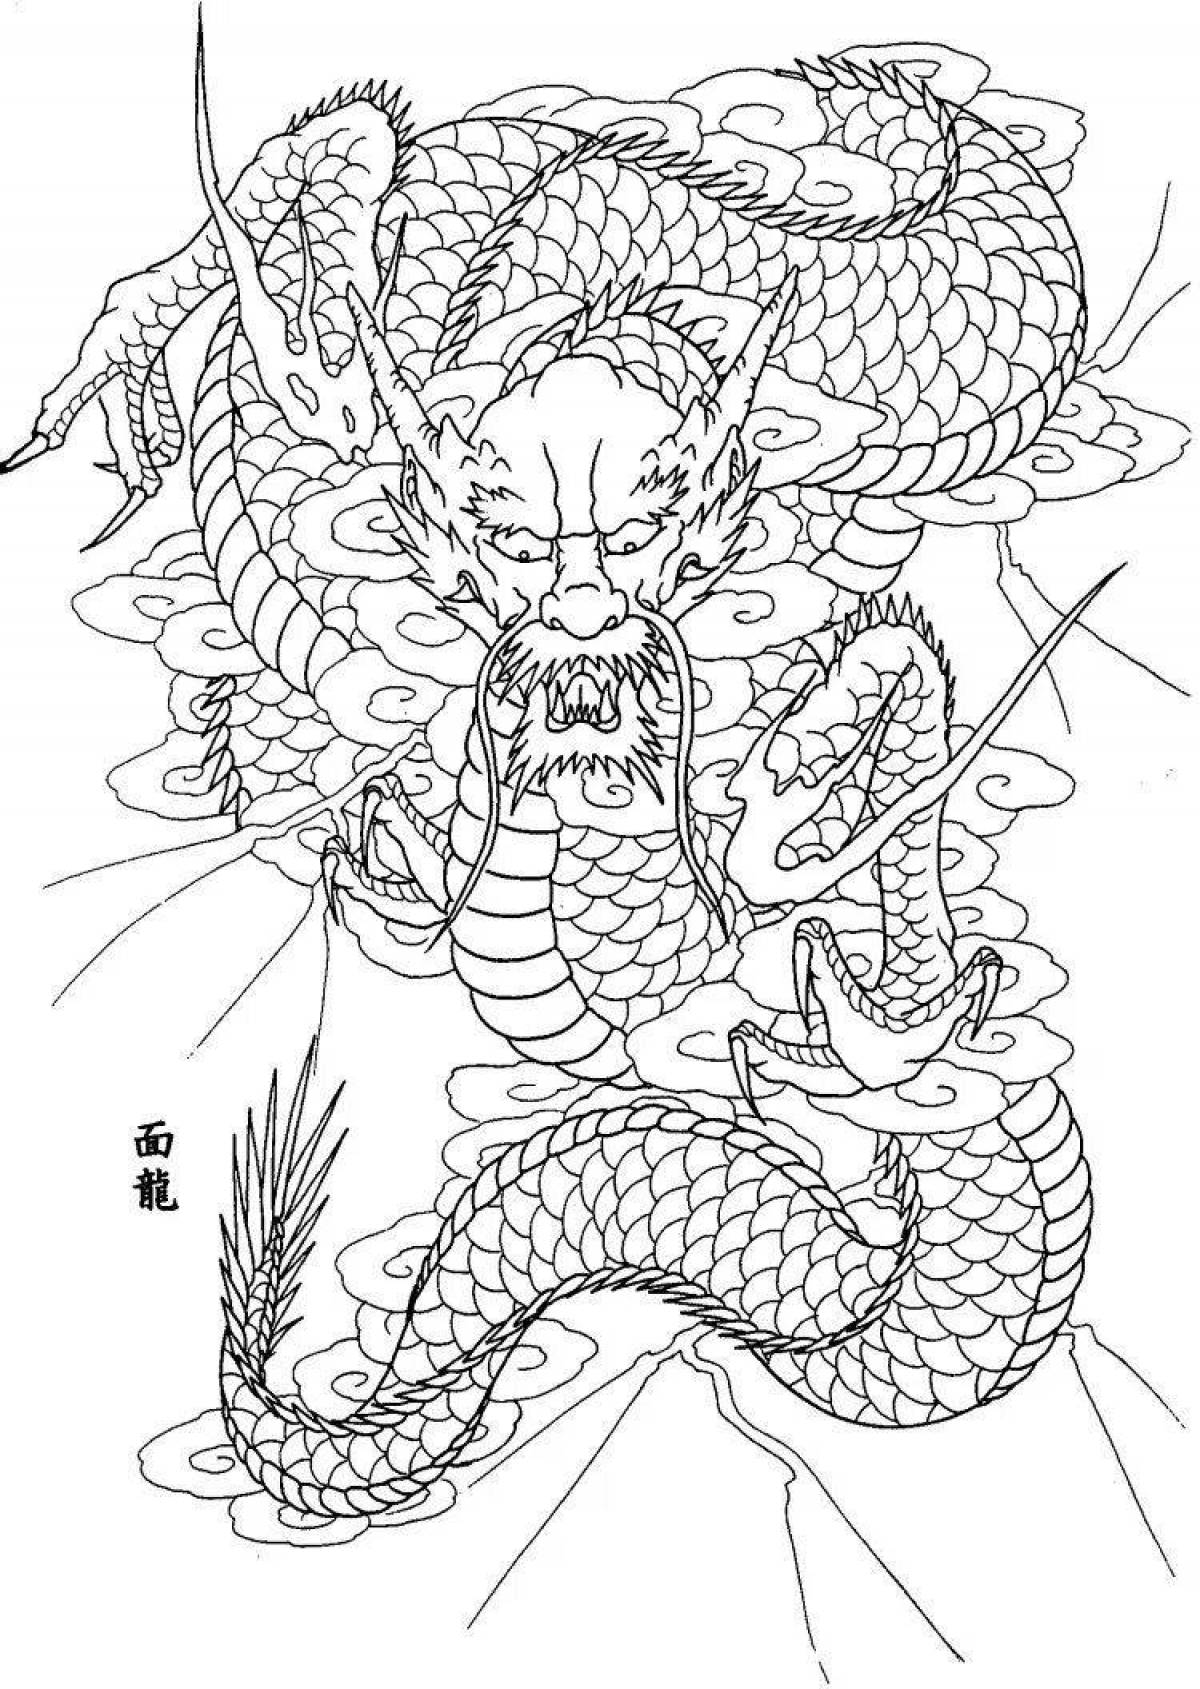 Japanese dragon colorful coloring page